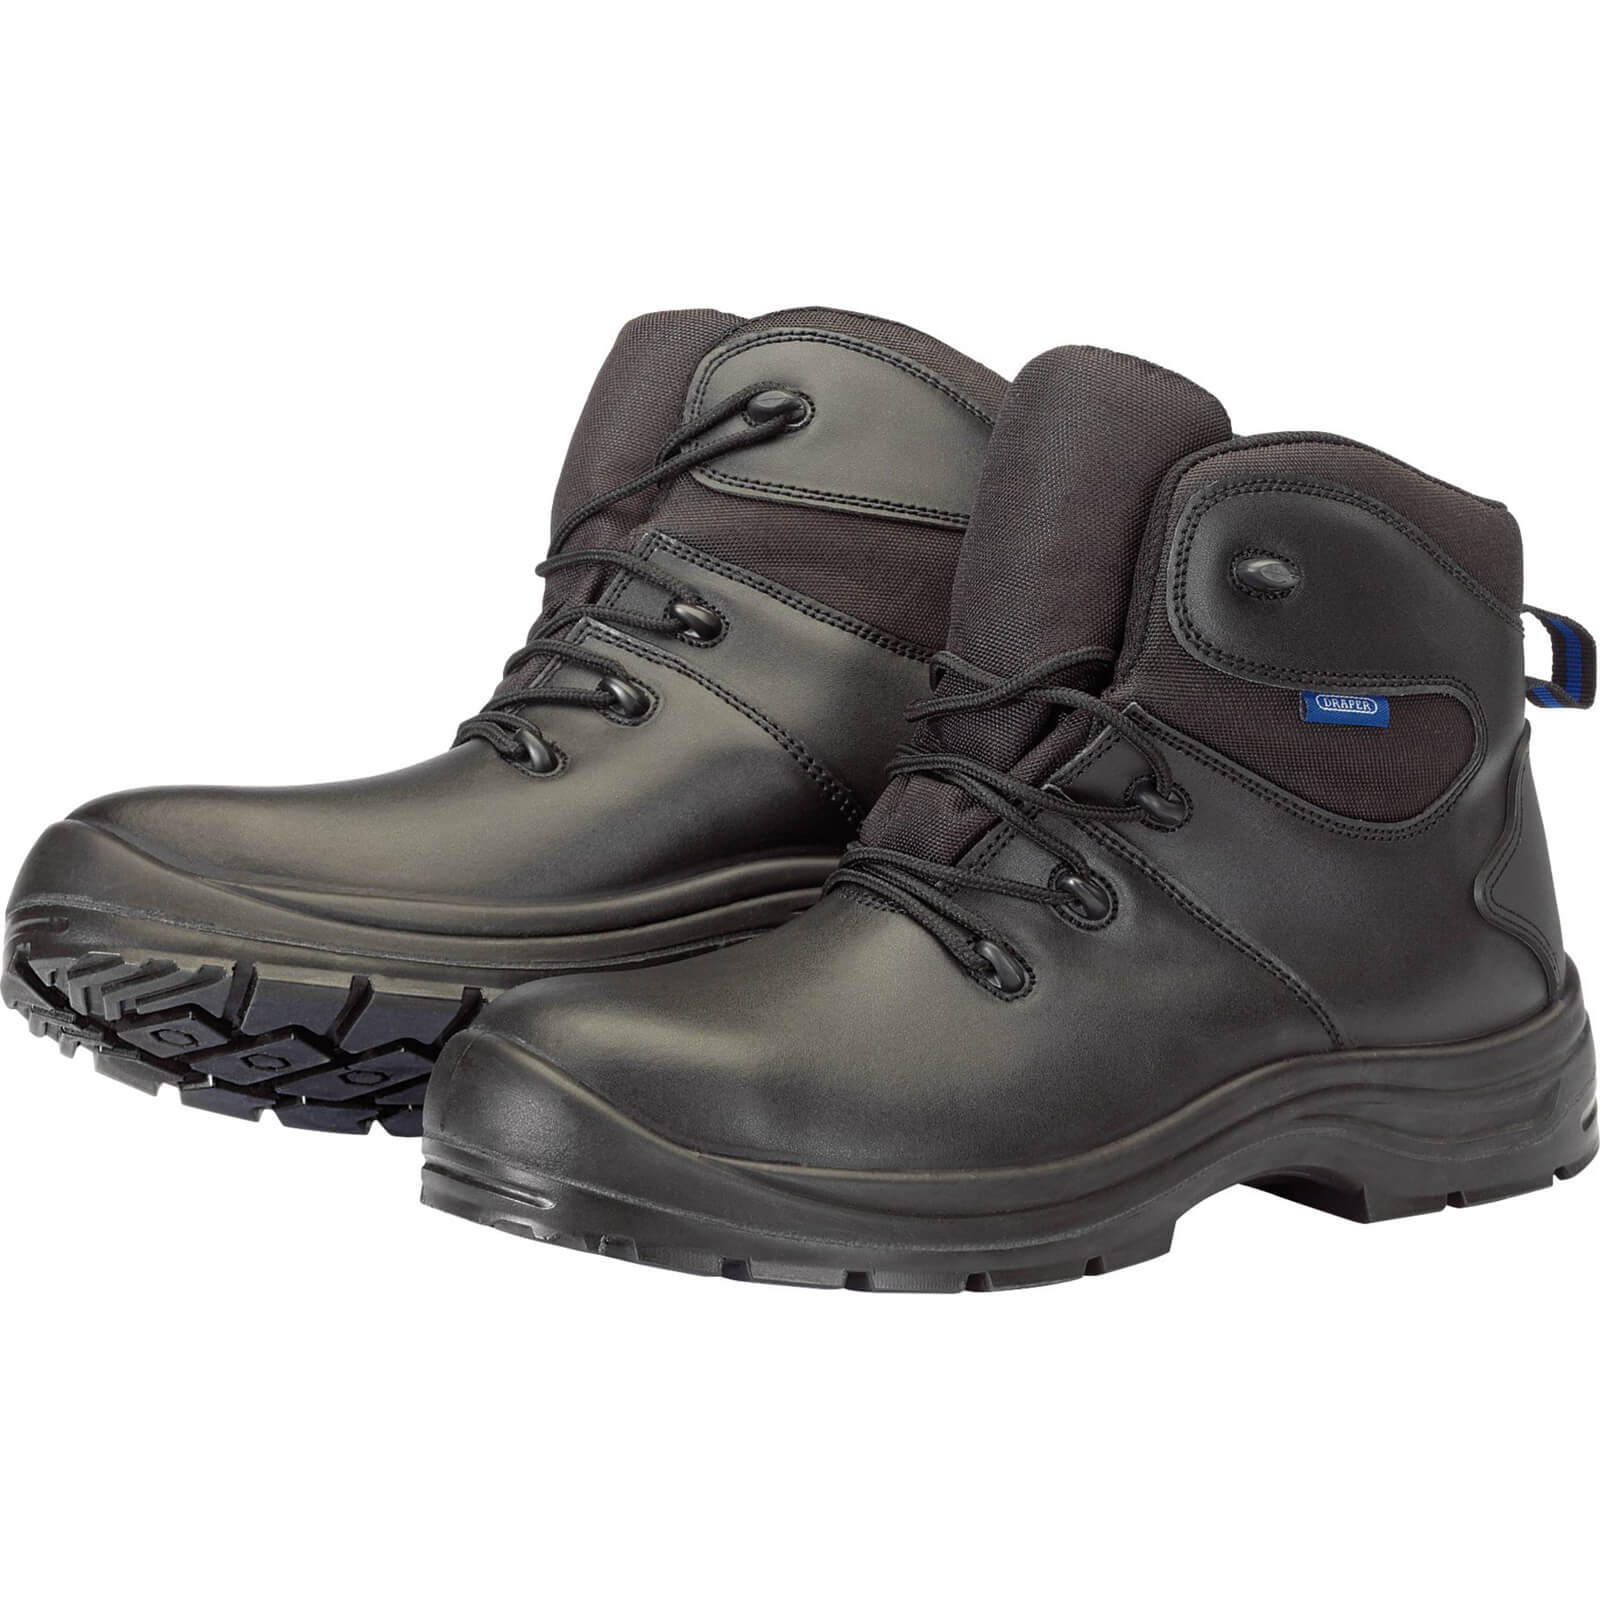 Image of Draper Mens Waterproof Safety Boots Black Size 9